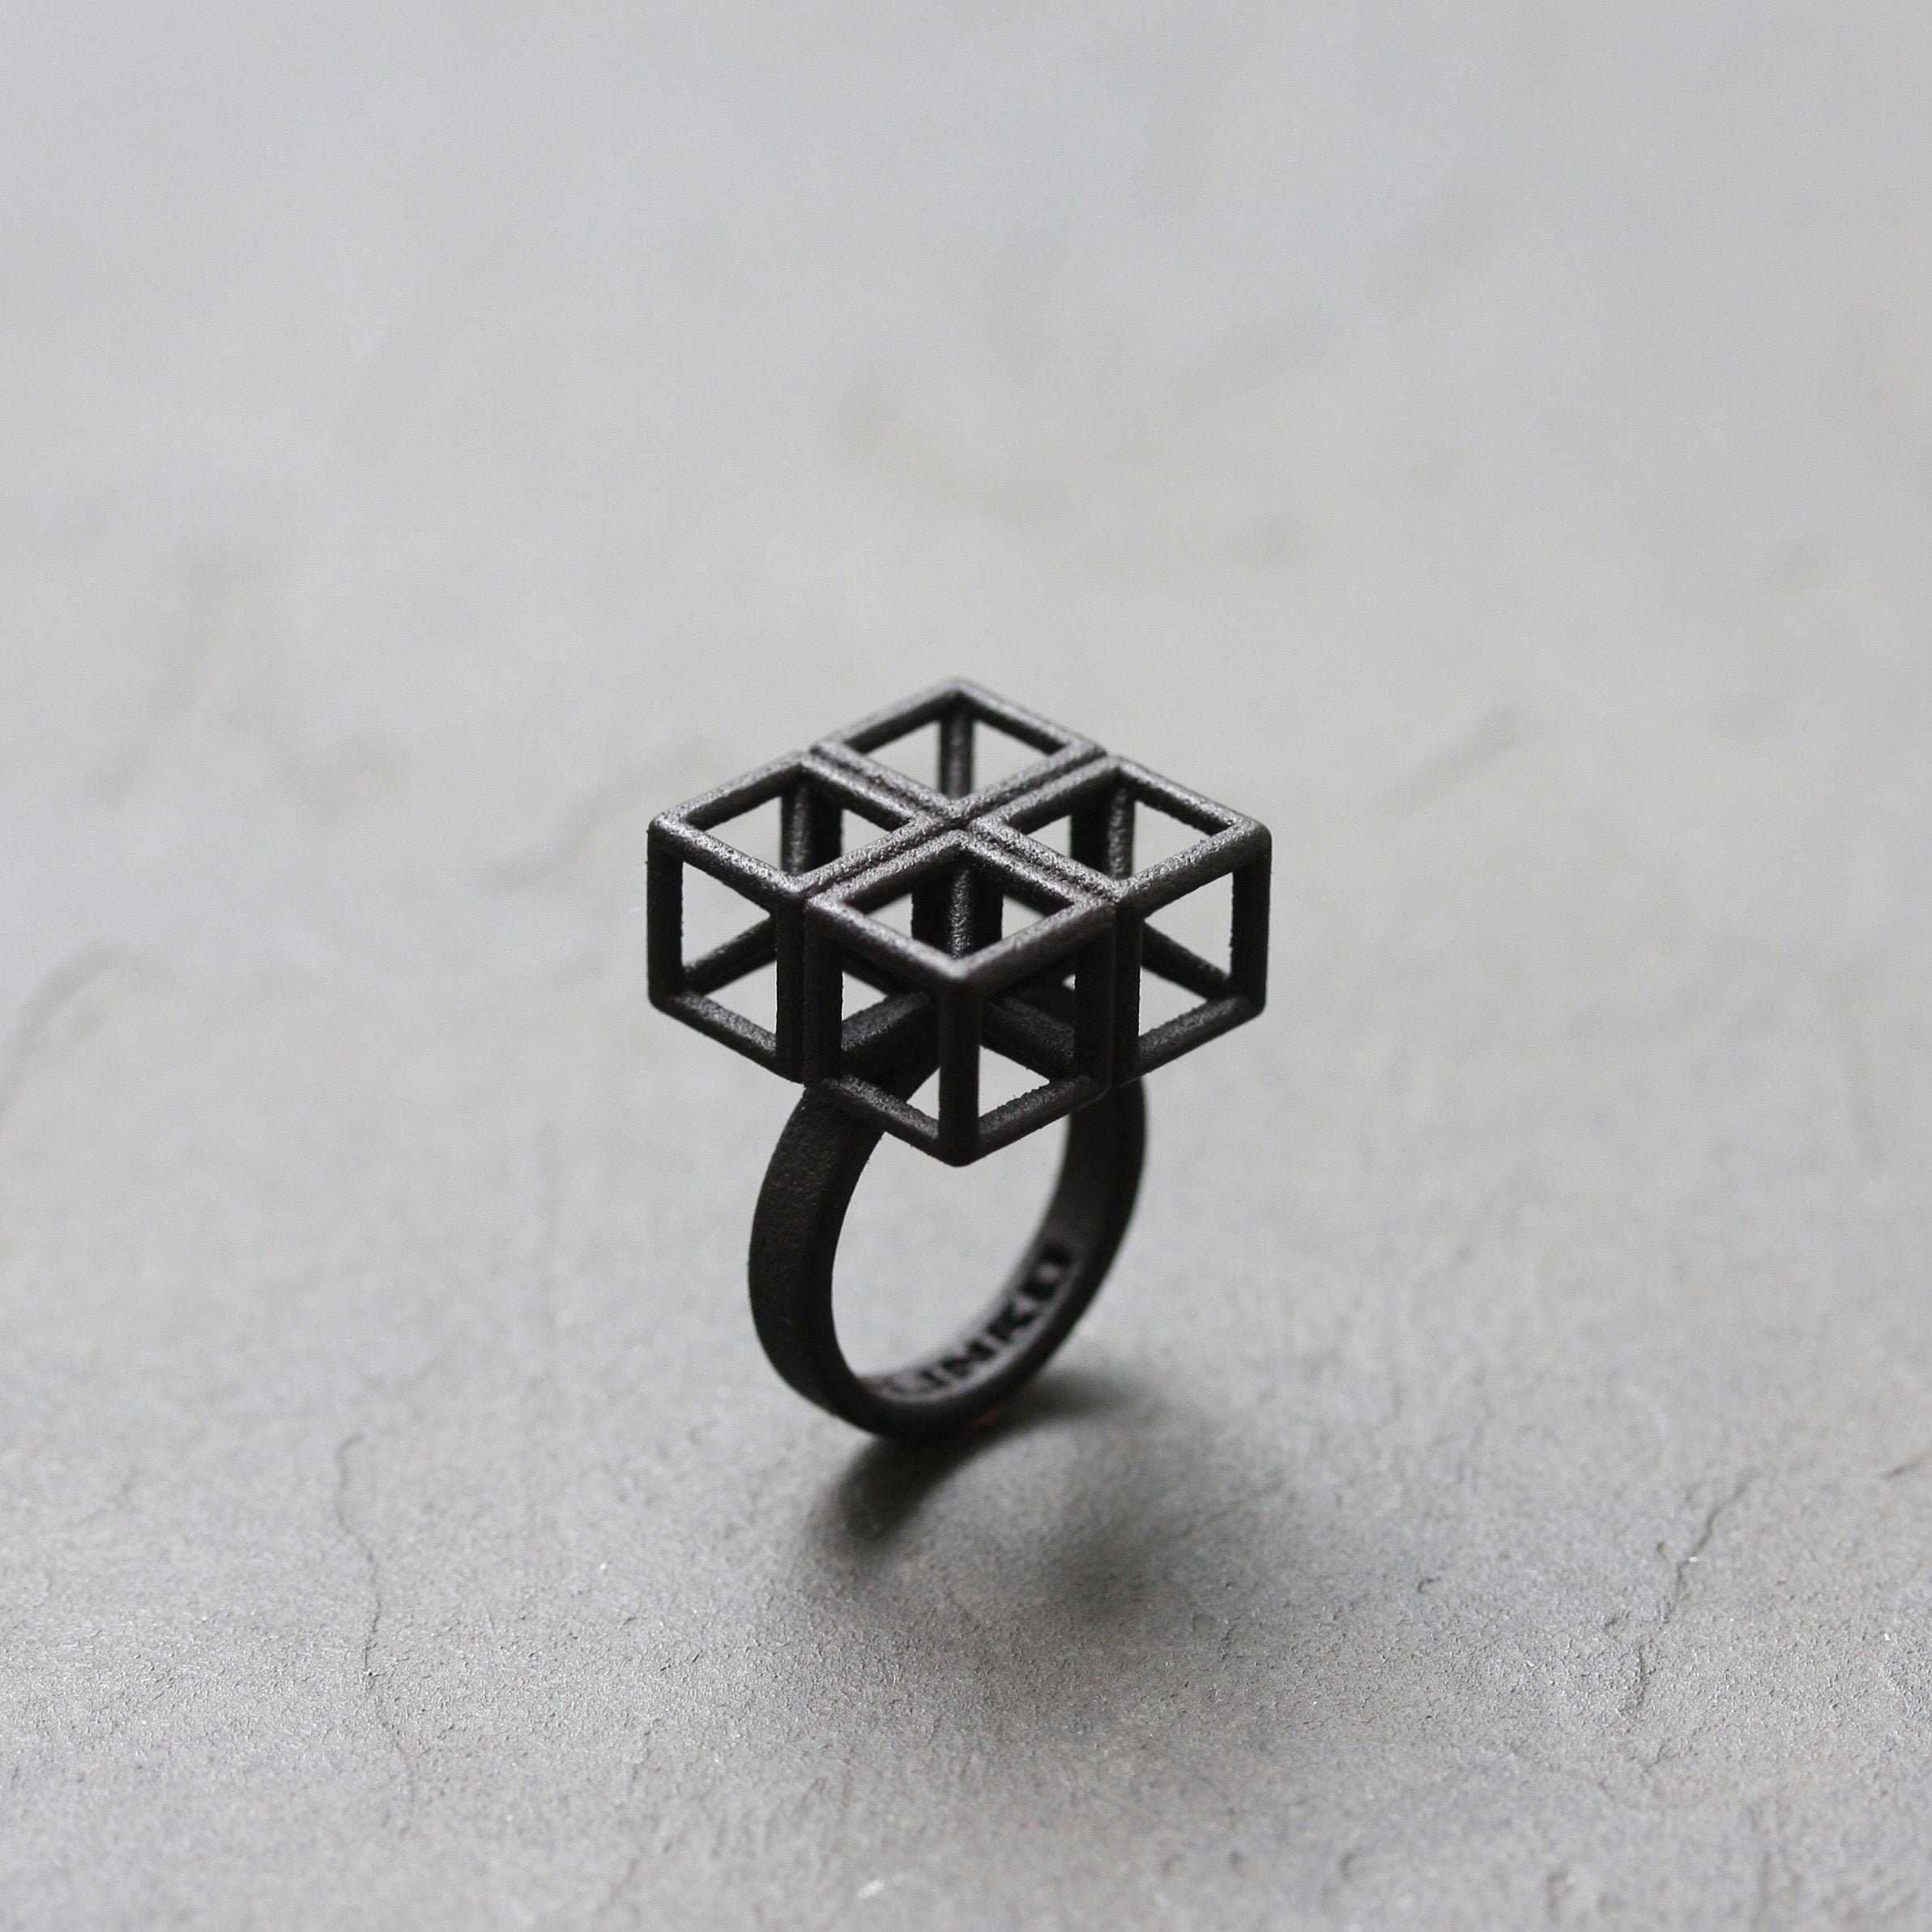 Square Puzzle 3d Printed Ring